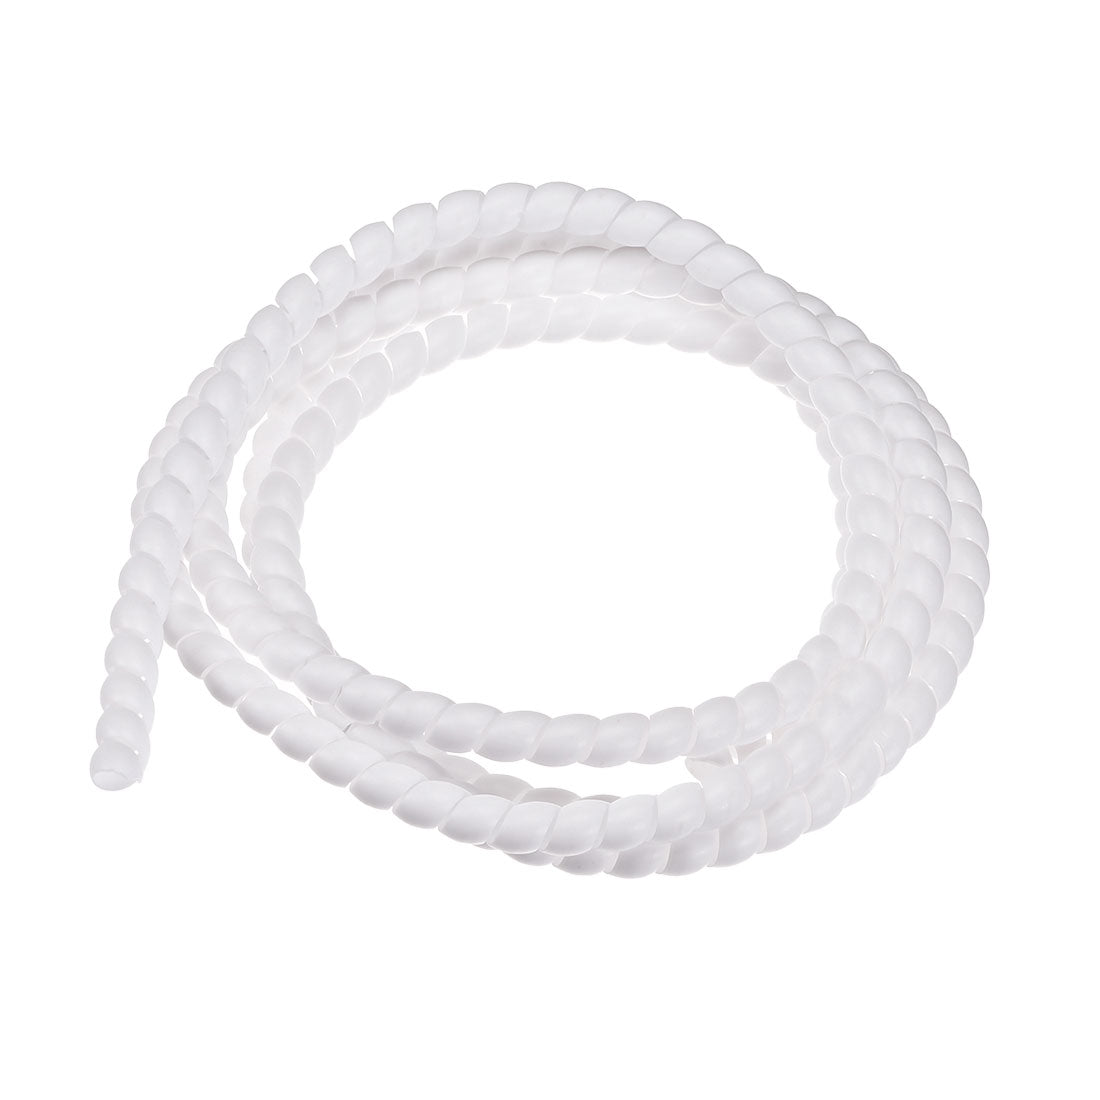 uxcell Uxcell Flexible Spiral Tube Wrap Cable Management Sleeve 10mm x 12mm Computer Wire Manage Cord 2 Meters Length White